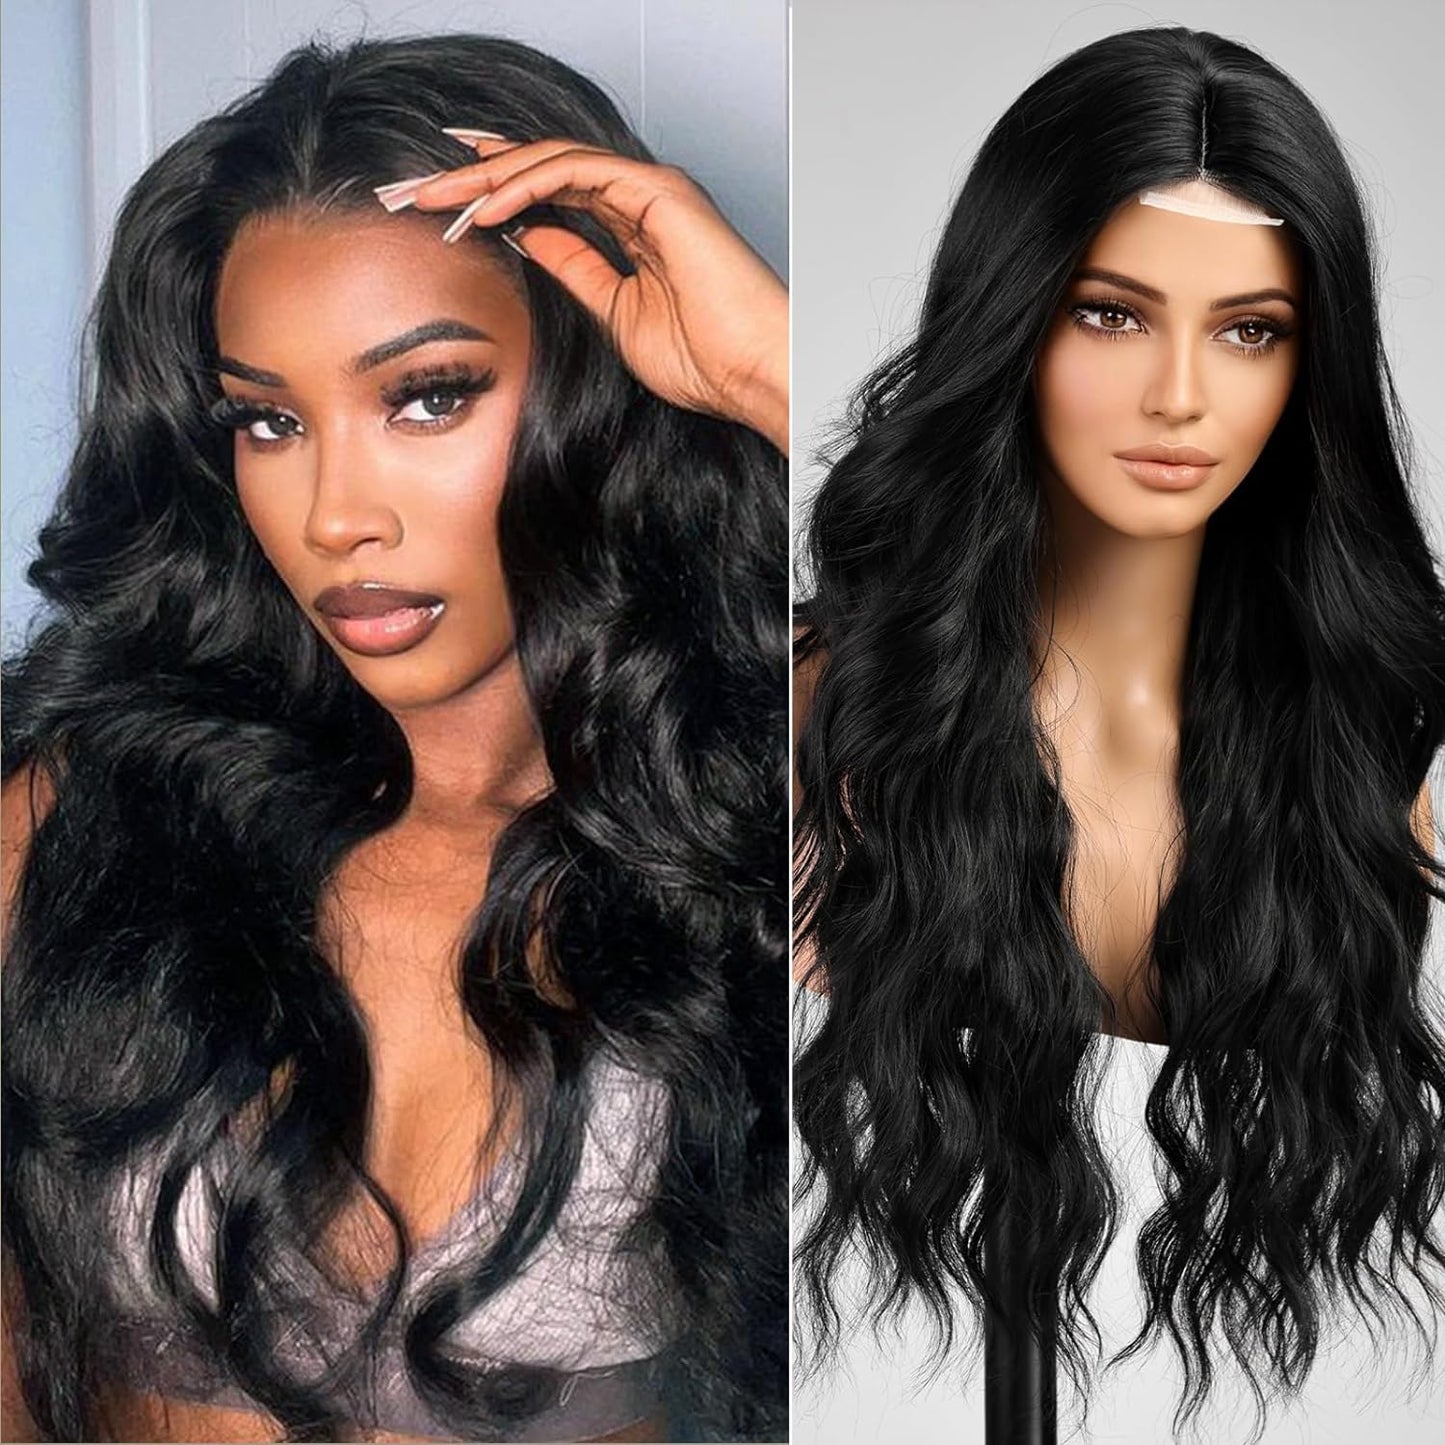 Black Wig,Black Wigs for Women,Lace Front Middle Part Long Wavy Wig Curly Synthetic Hair Wig for Party Daily Use 26IN…